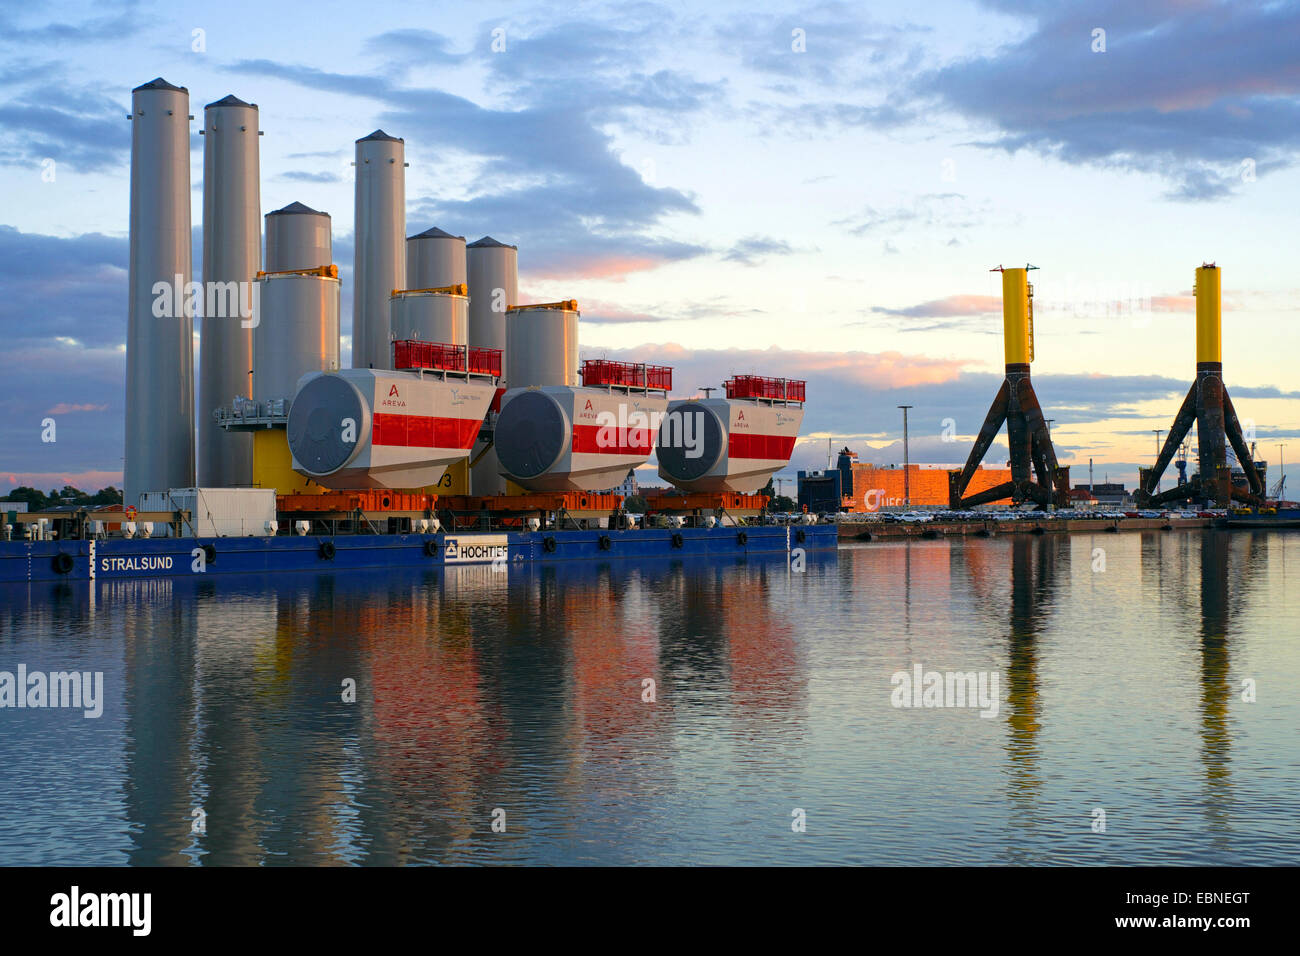 components for offshore wind farms in harbour Kaiserhafen, Germany, Bremerhaven Stock Photo